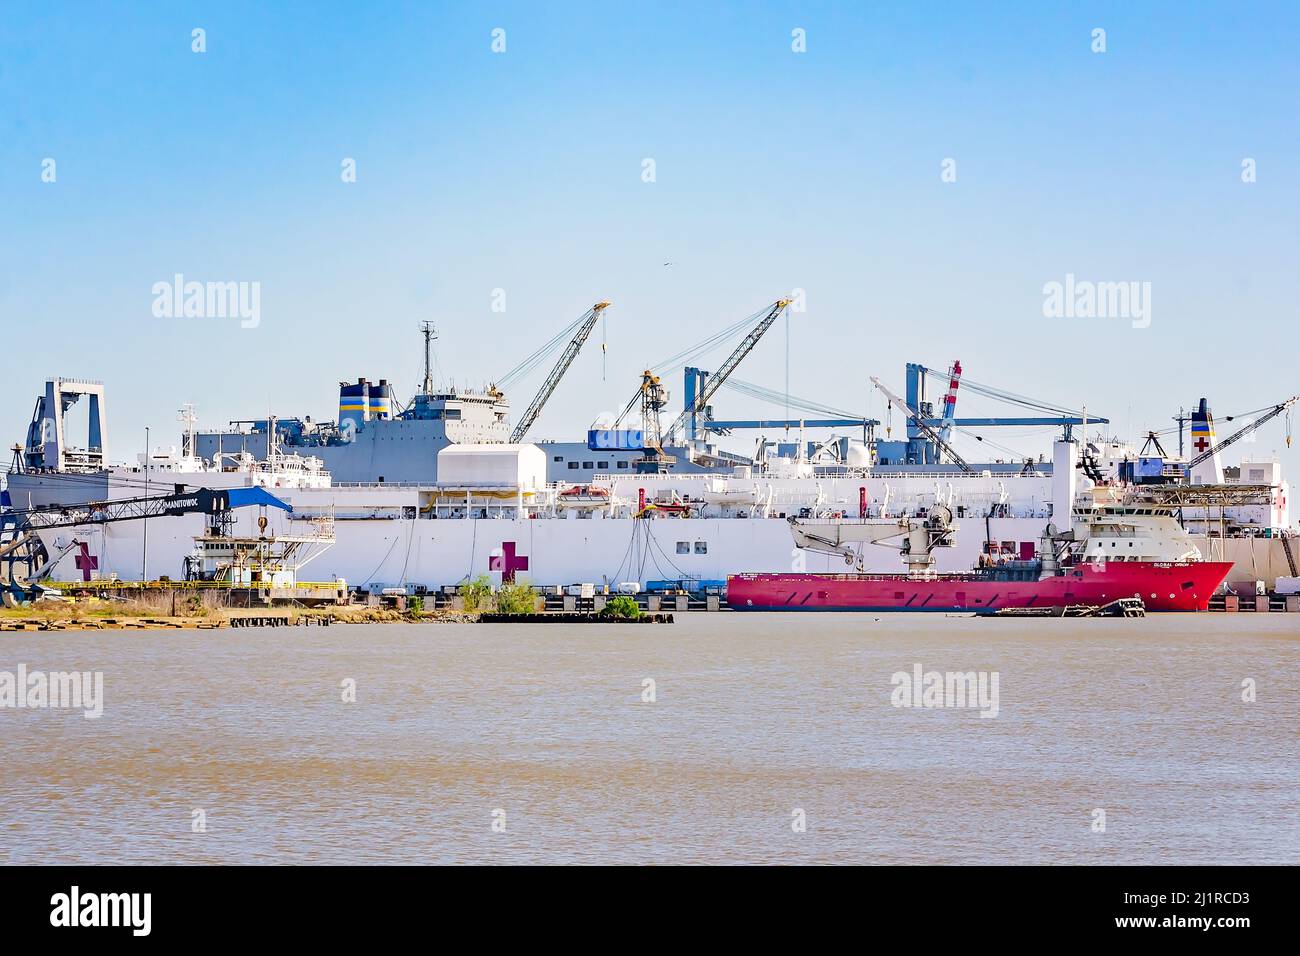 The USNS Comfort, a Navy hospital ship, is docked for repairs at Alabama Shipyard, March 25, 2022, in Mobile, Alabama. Stock Photo